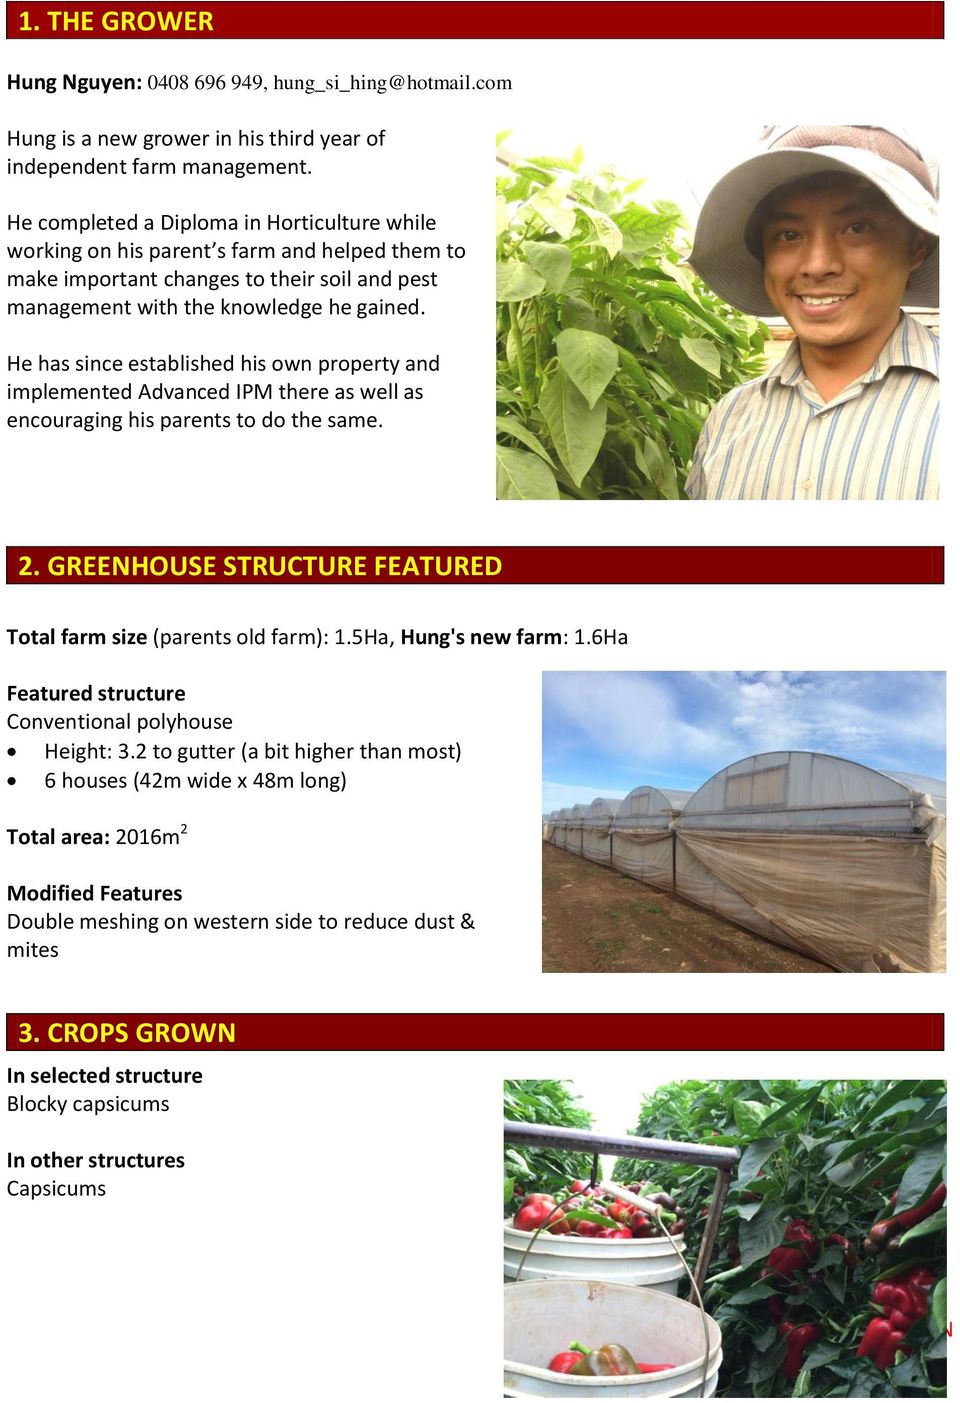 He has since established his own property and implemented Advanced IPM there as well as encouraging his parents to do the same. 2. GREENHOUSE STRUCTURE FEATURED Total farm size (parents old farm): 1.